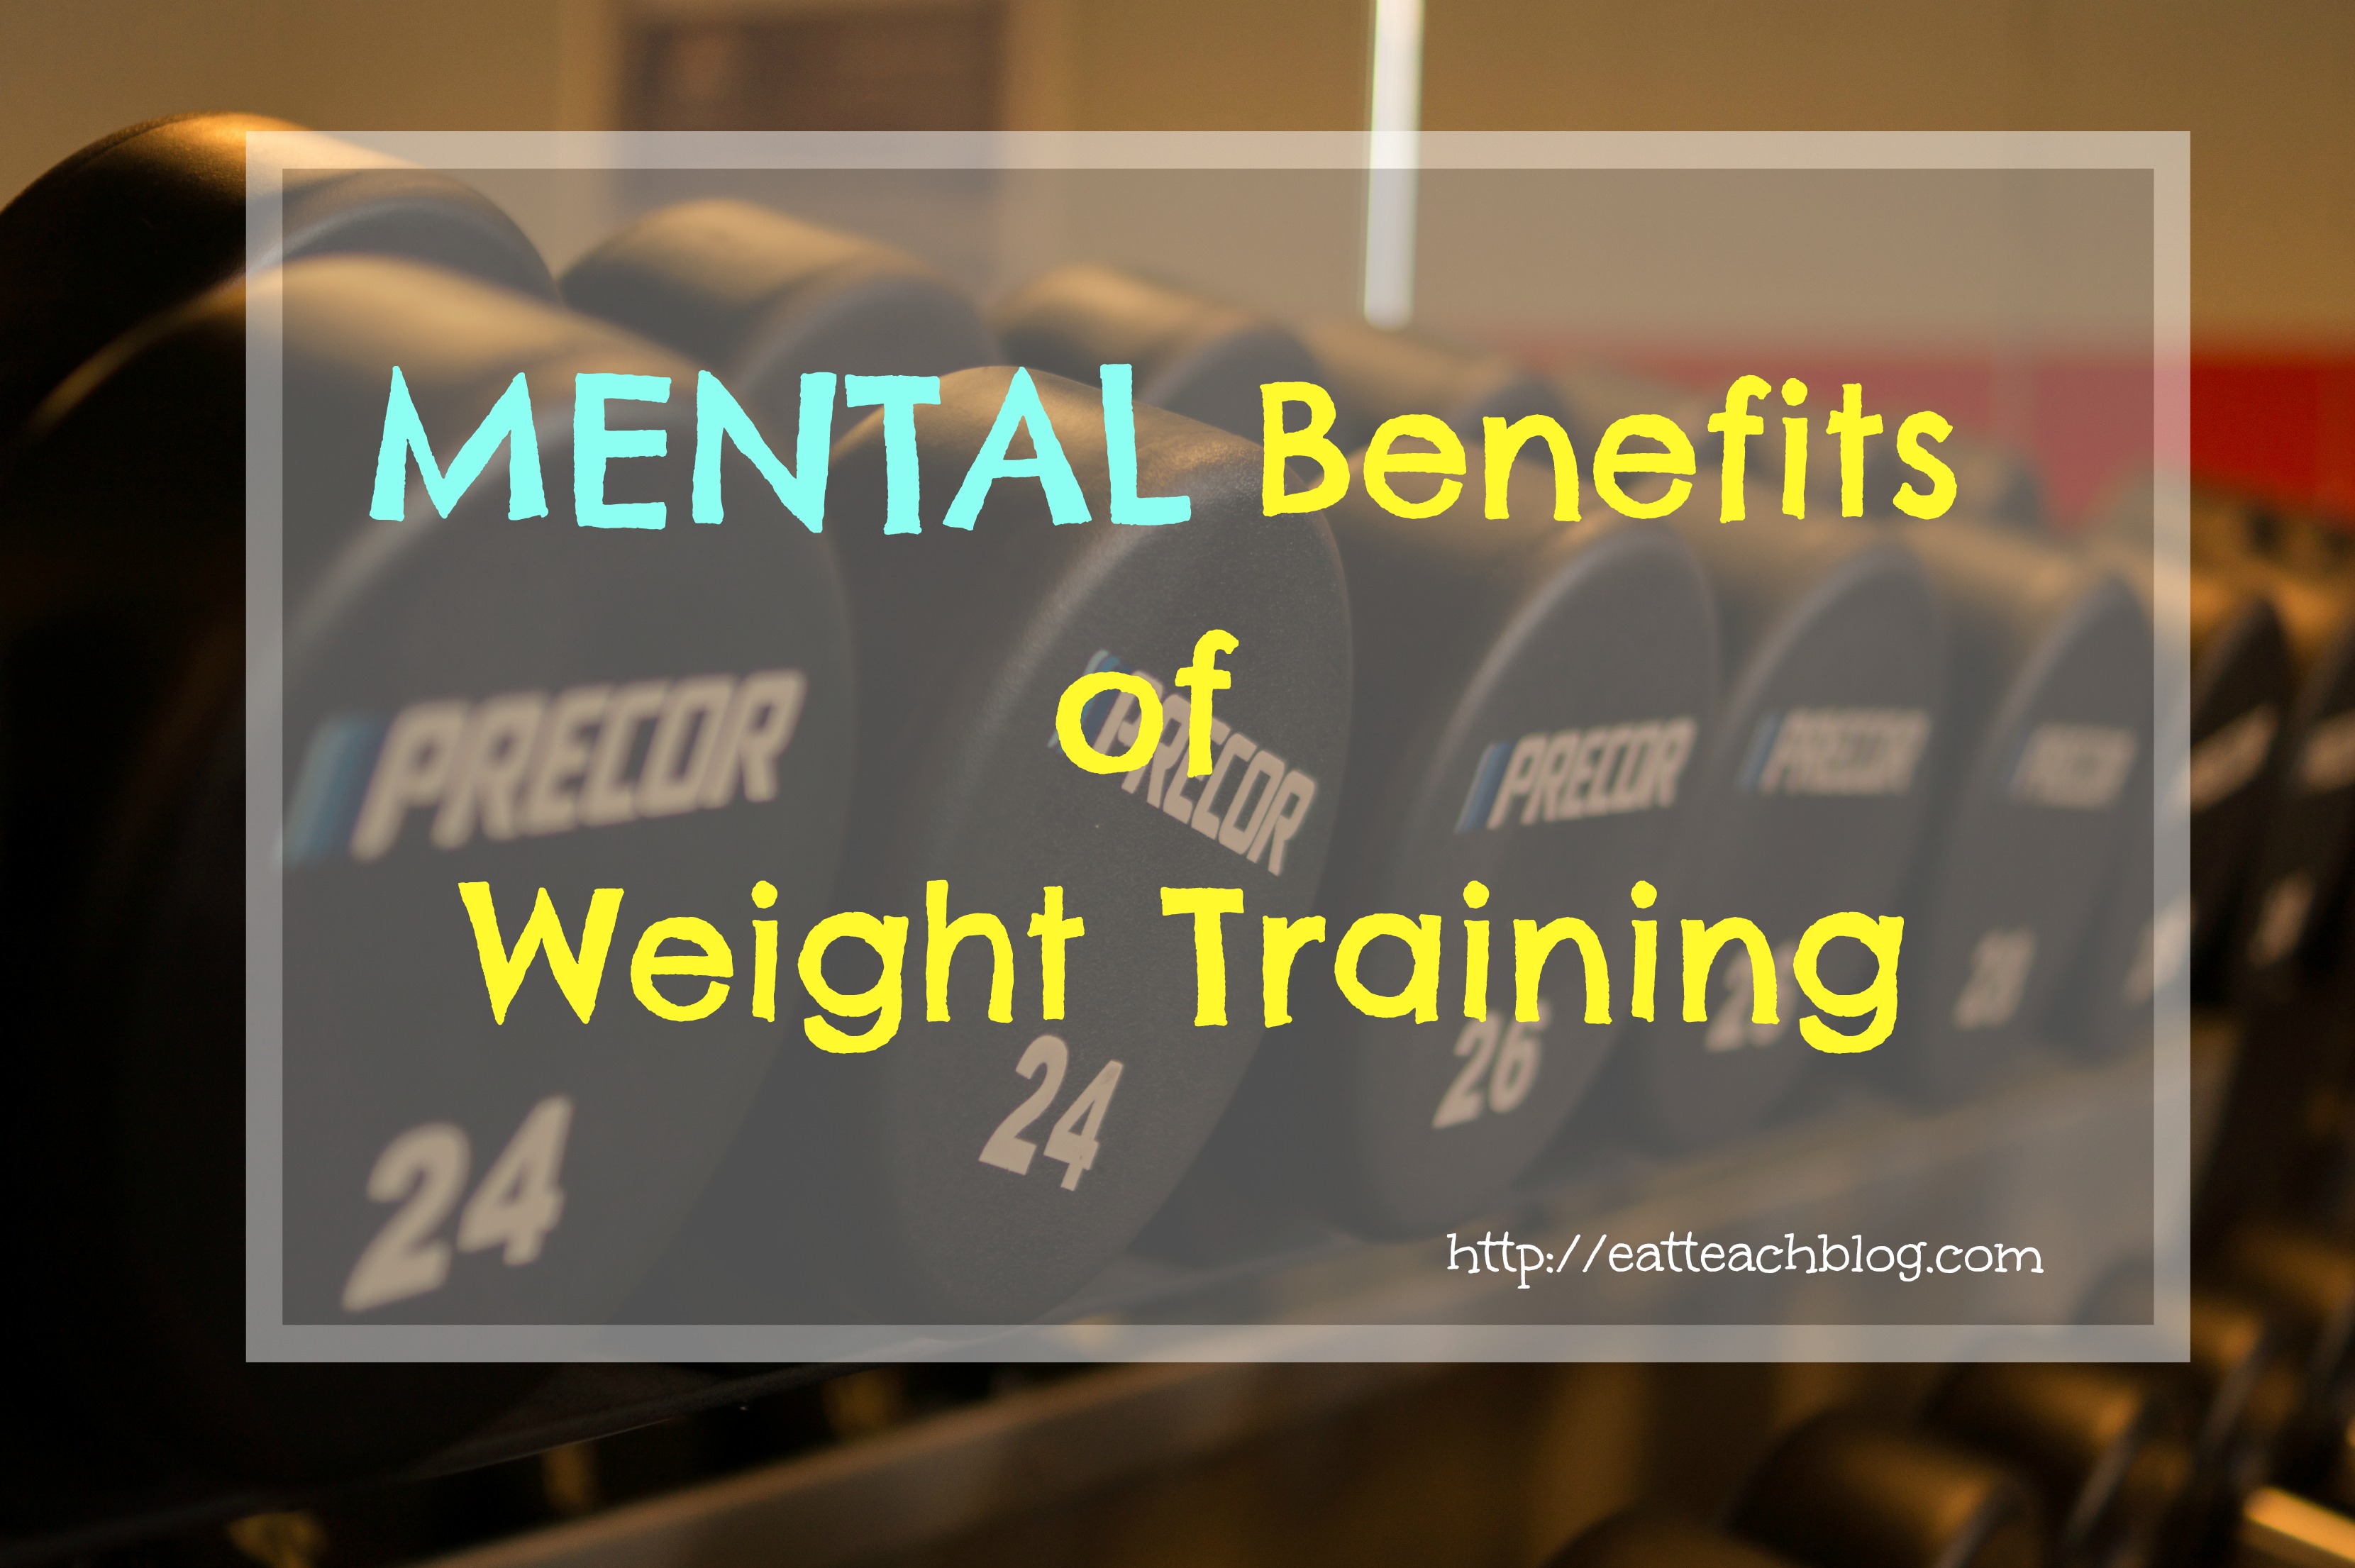 Mental Benefits Of Weight Training Benefits That Go Beyond The Physical Gains